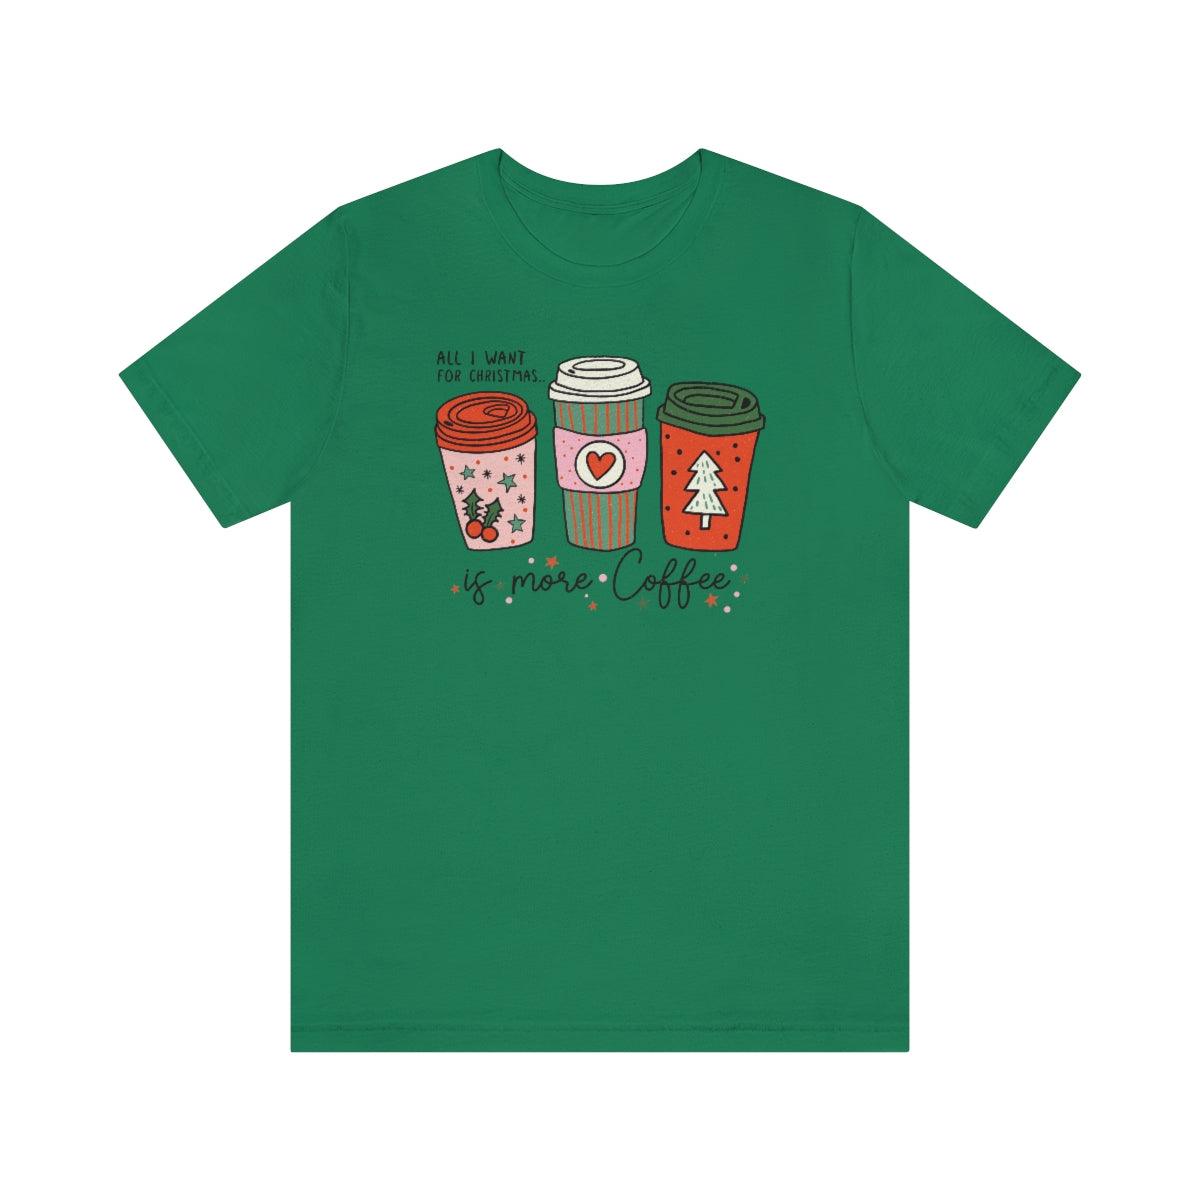 All I Want For Christmas Is More Coffee Christmas Shirt Short Sleeve Tee